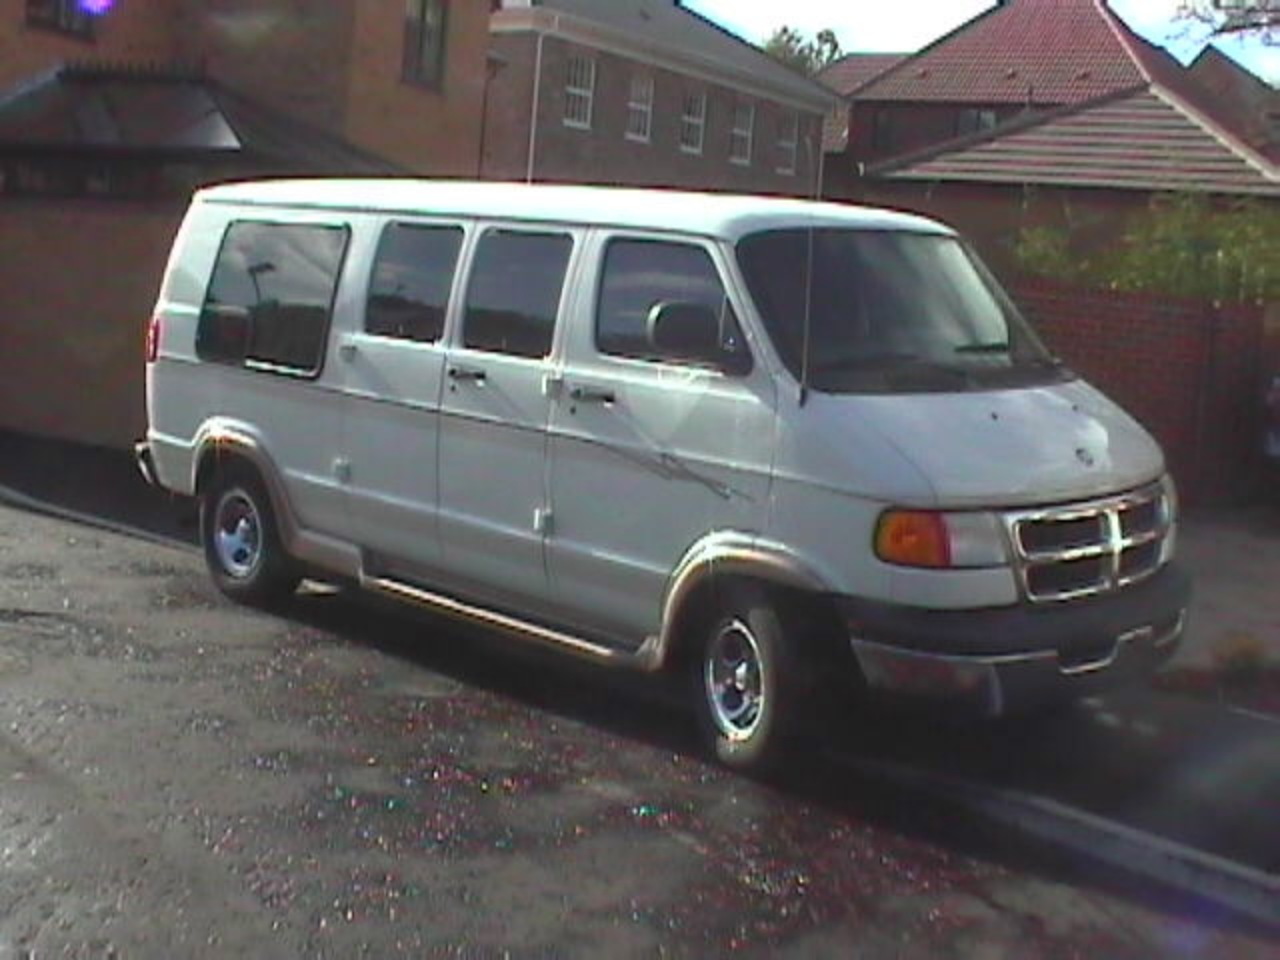 The 2000 Dodge Ram Van 2500 is created by Dodge. This version of Dodge Ram